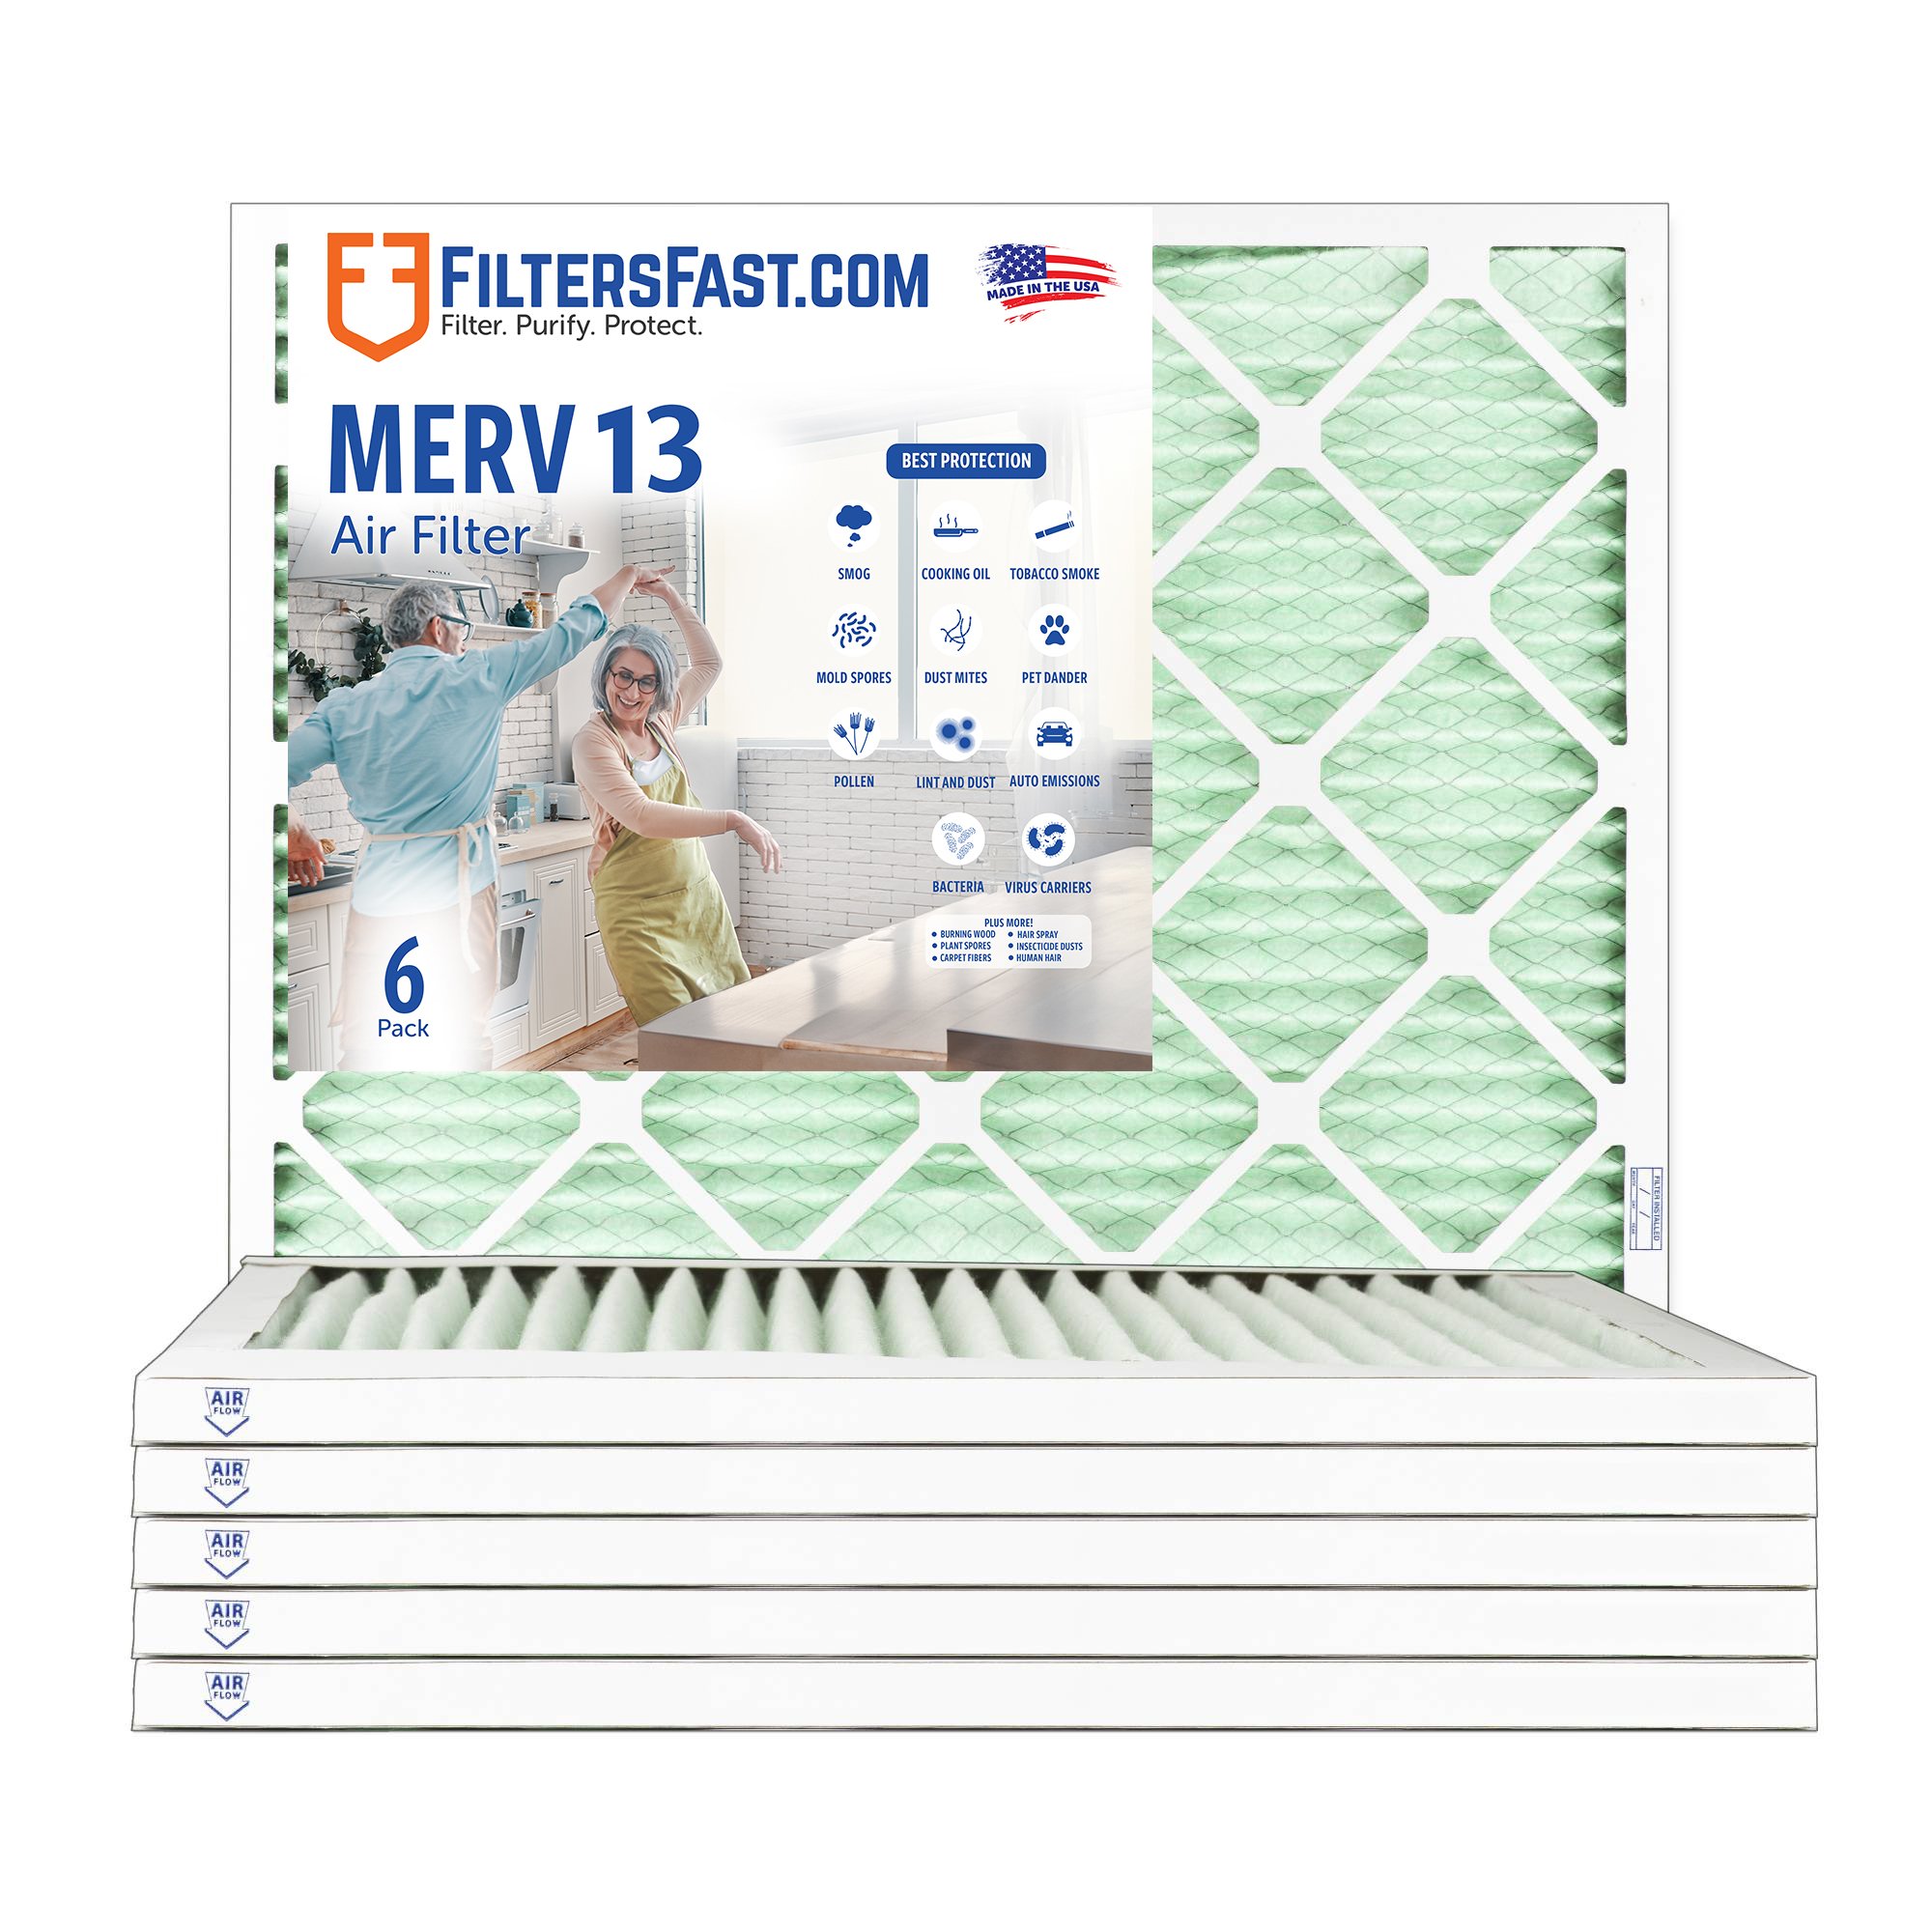 1" MERV 13 Furnace & AC Air Filter by Filters Fast® - 6-Pack